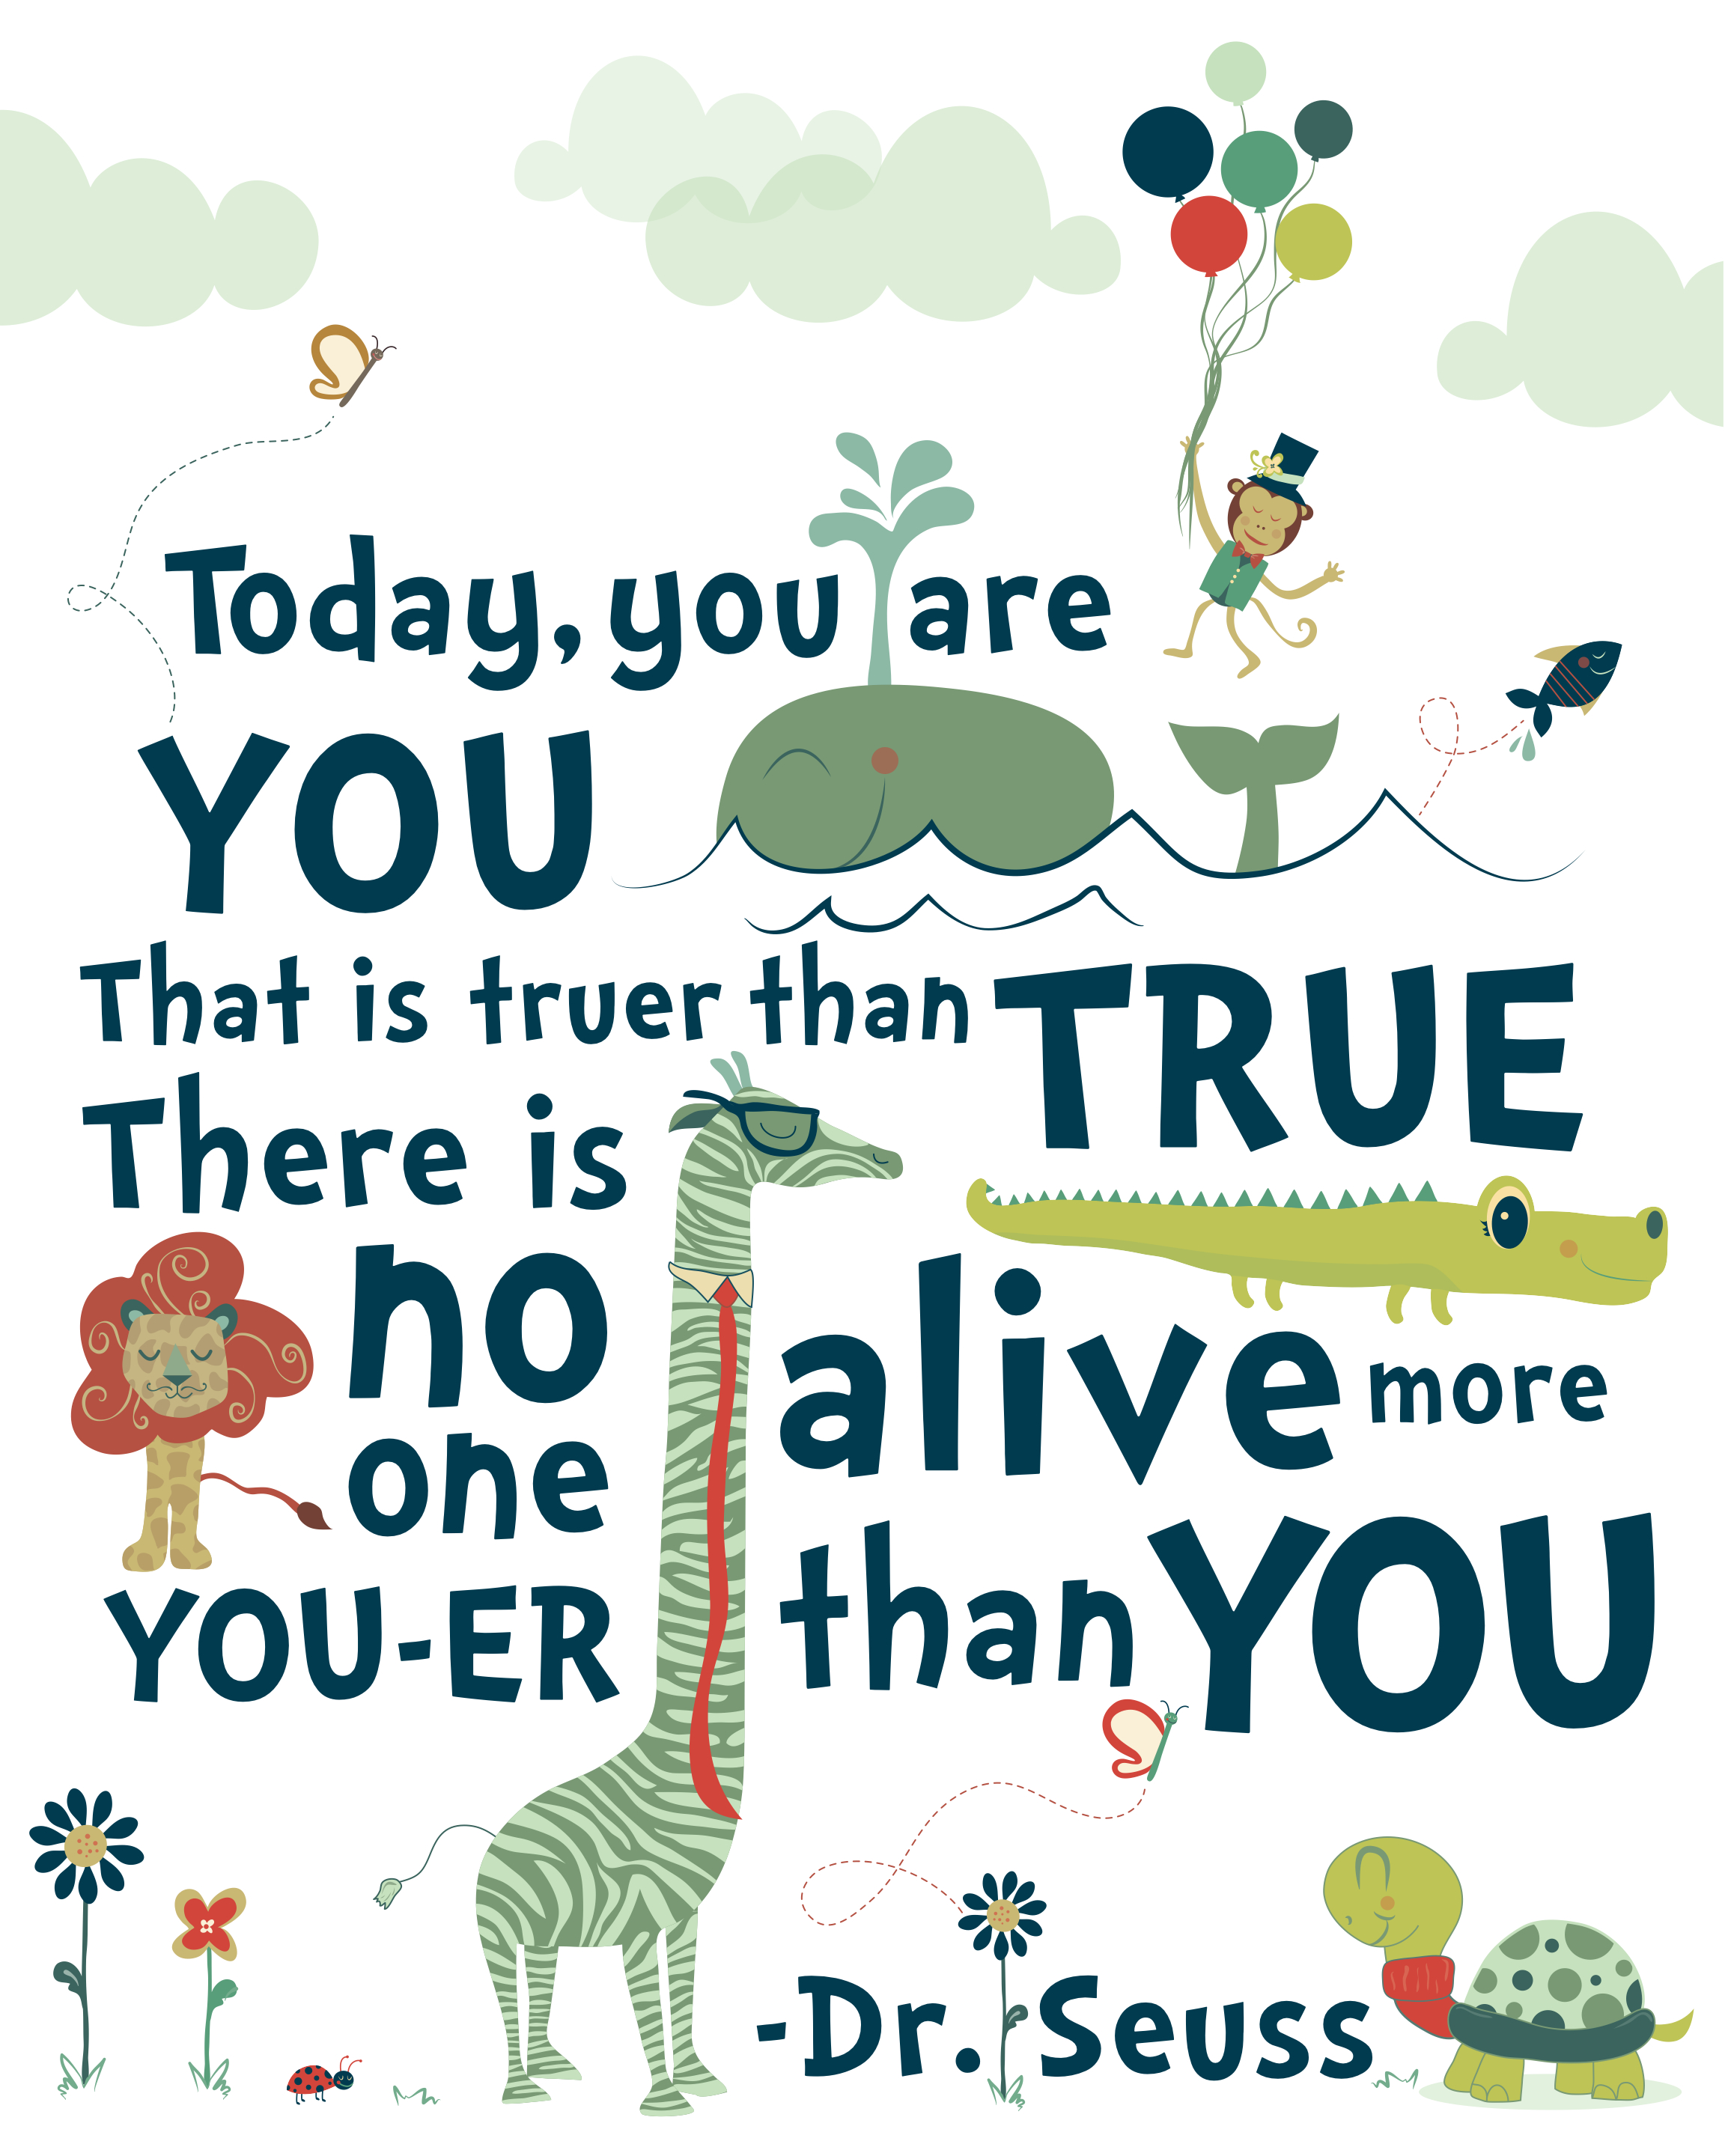 dr-seuss-quotes-be-who-you-aretoday-you-are-you-that-is-truer-than-true-----dr-seuss-g-liza-design-xxckrvaf